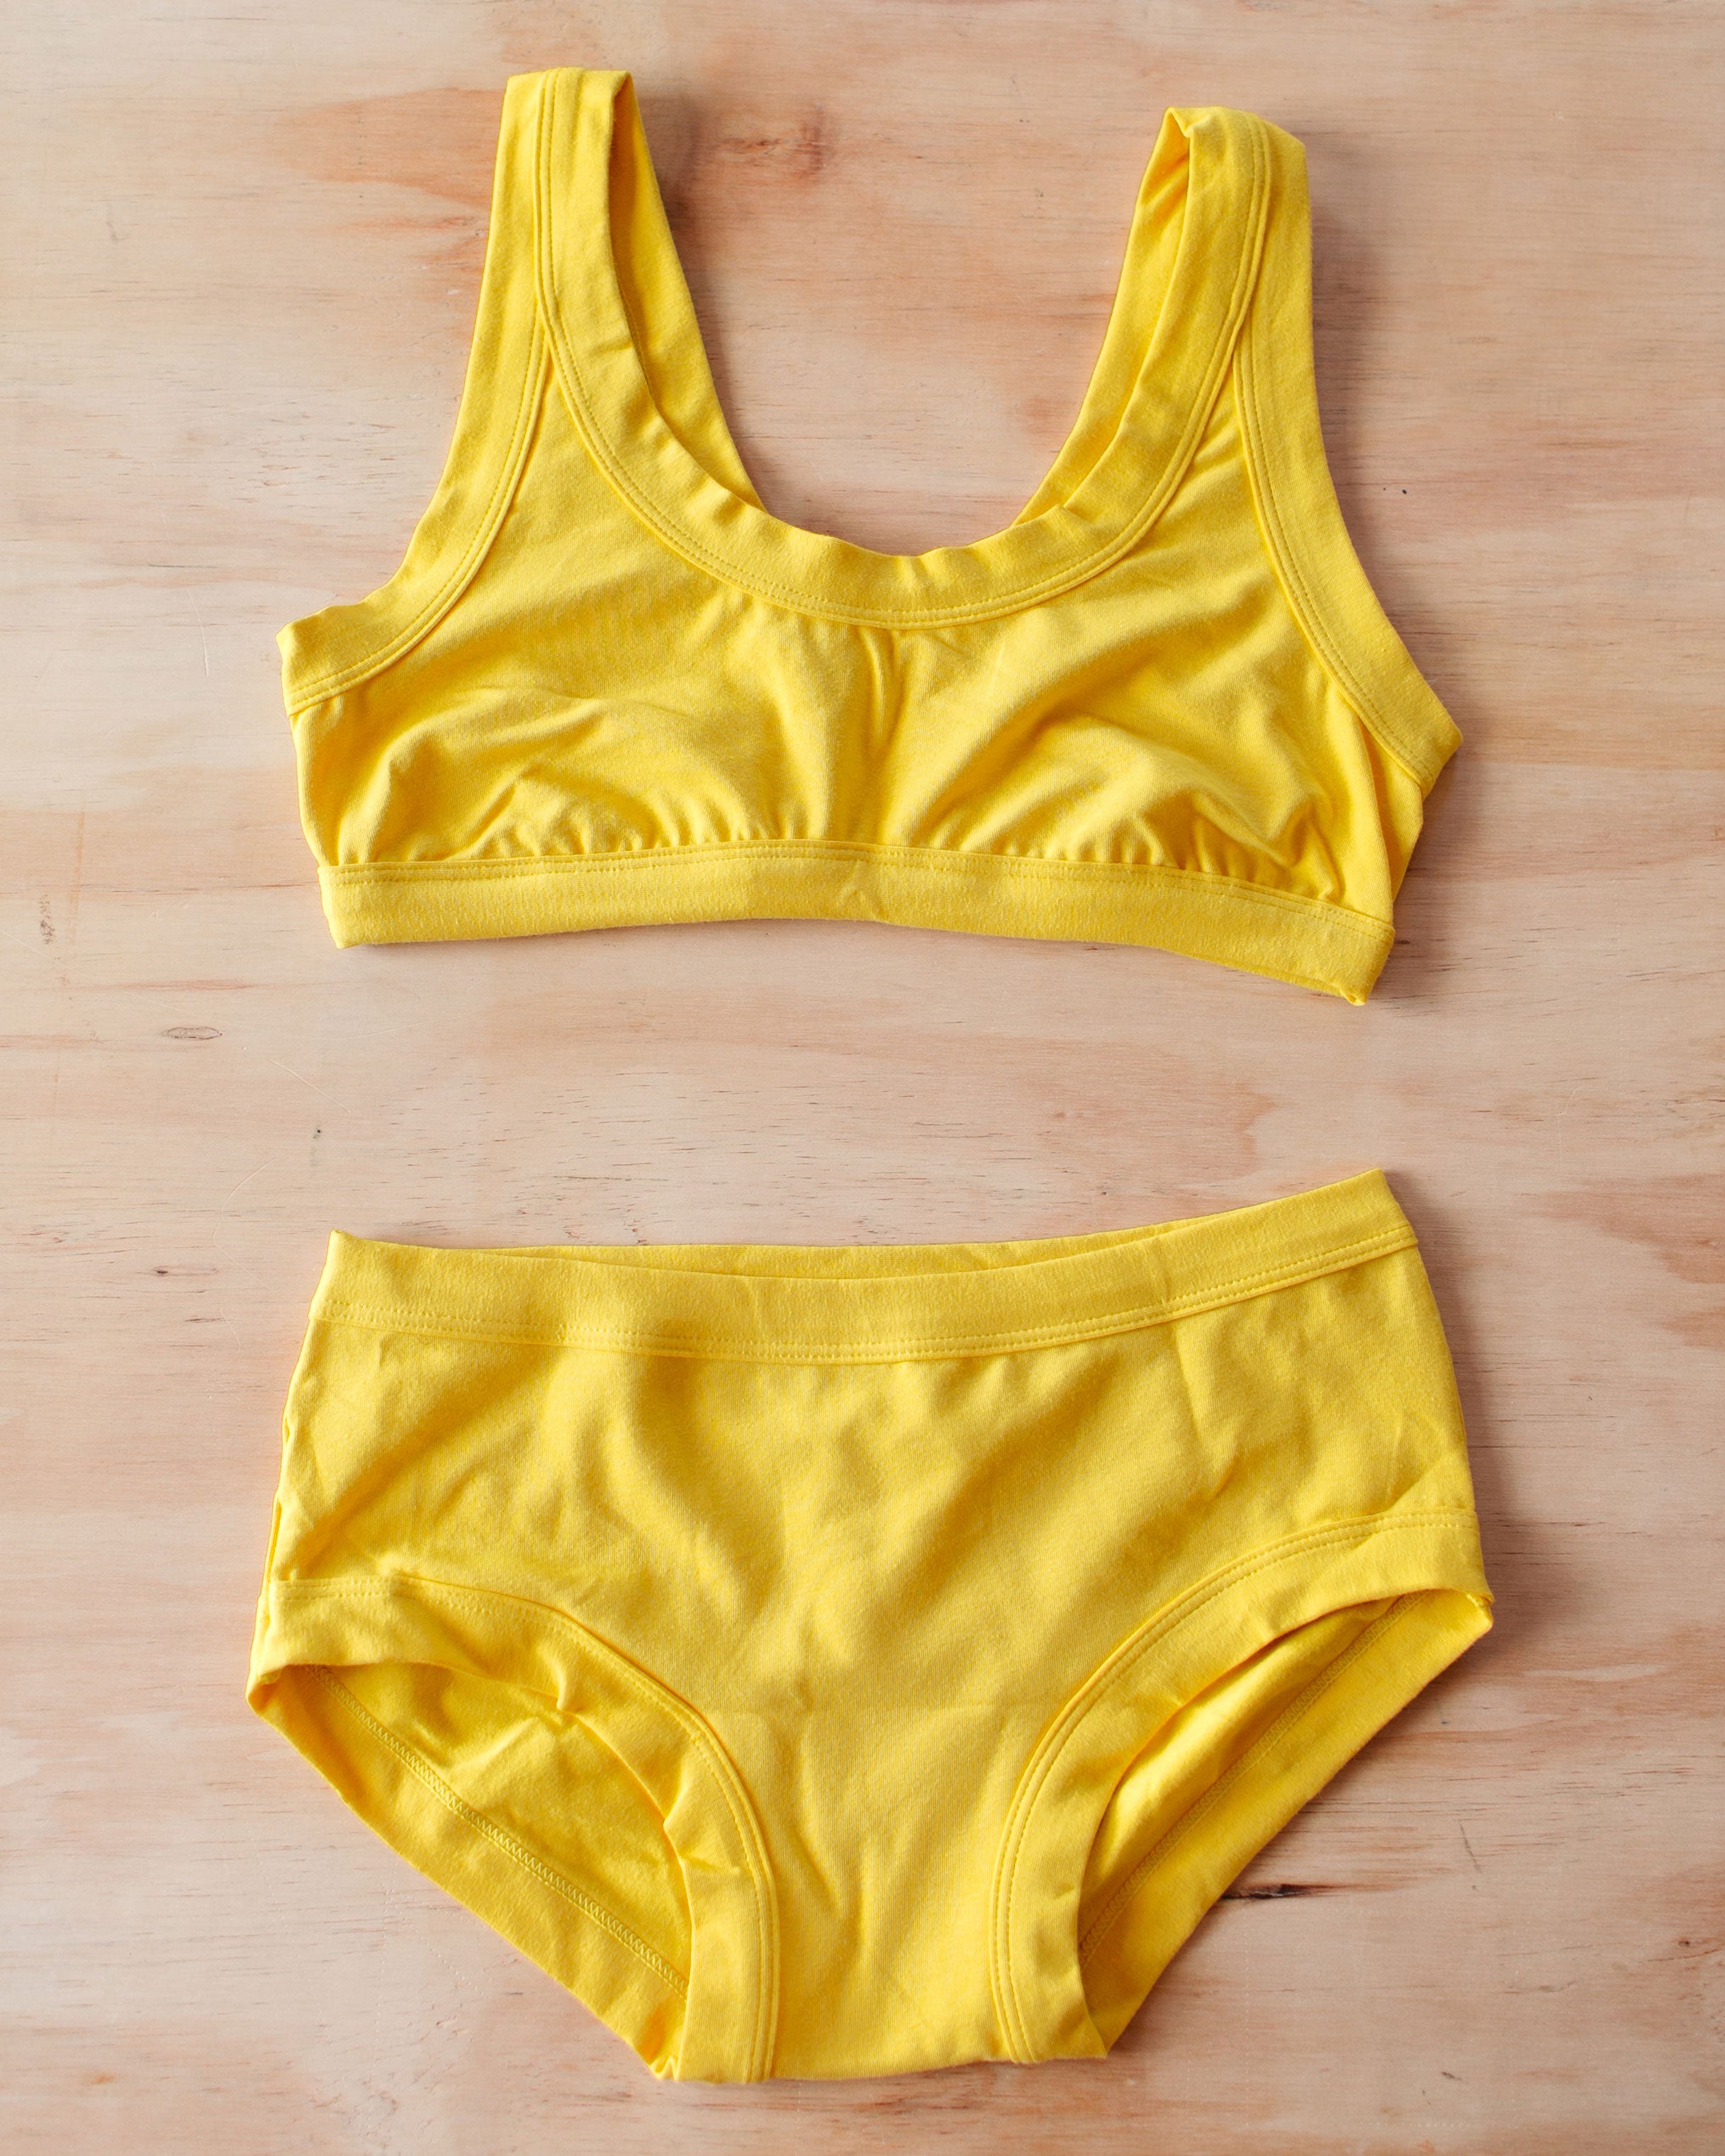 Flat lay of Thunderpants Organic Cotton Bralette and Hipster style underwear in Golden Yellow color.